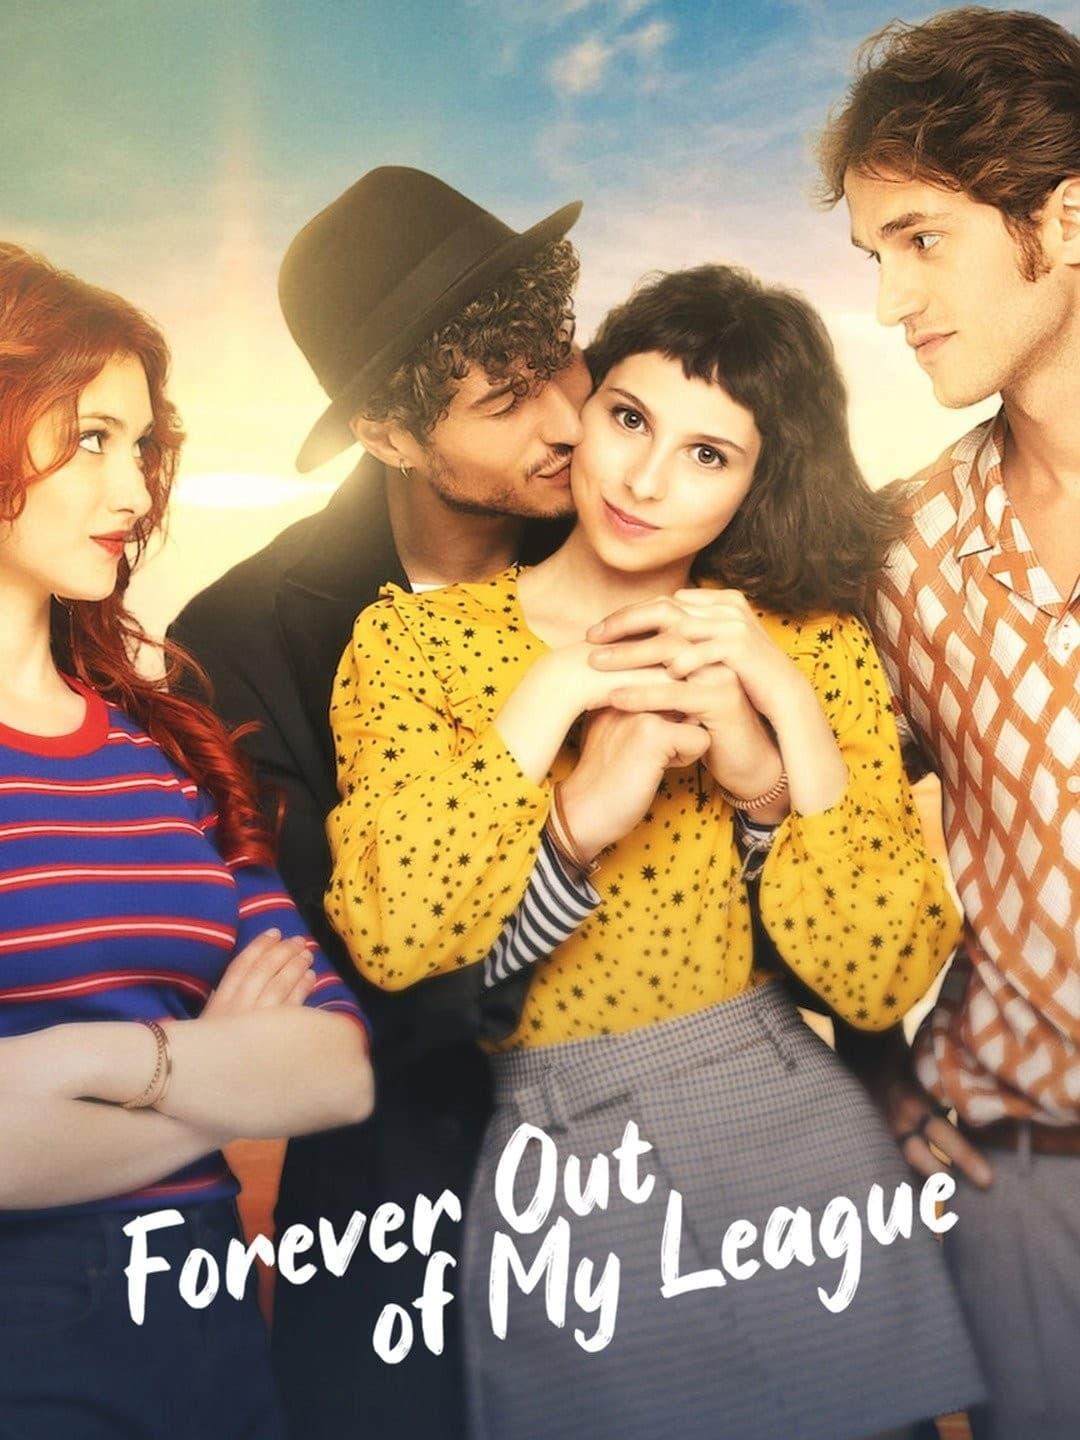 Forever Out of My League poster